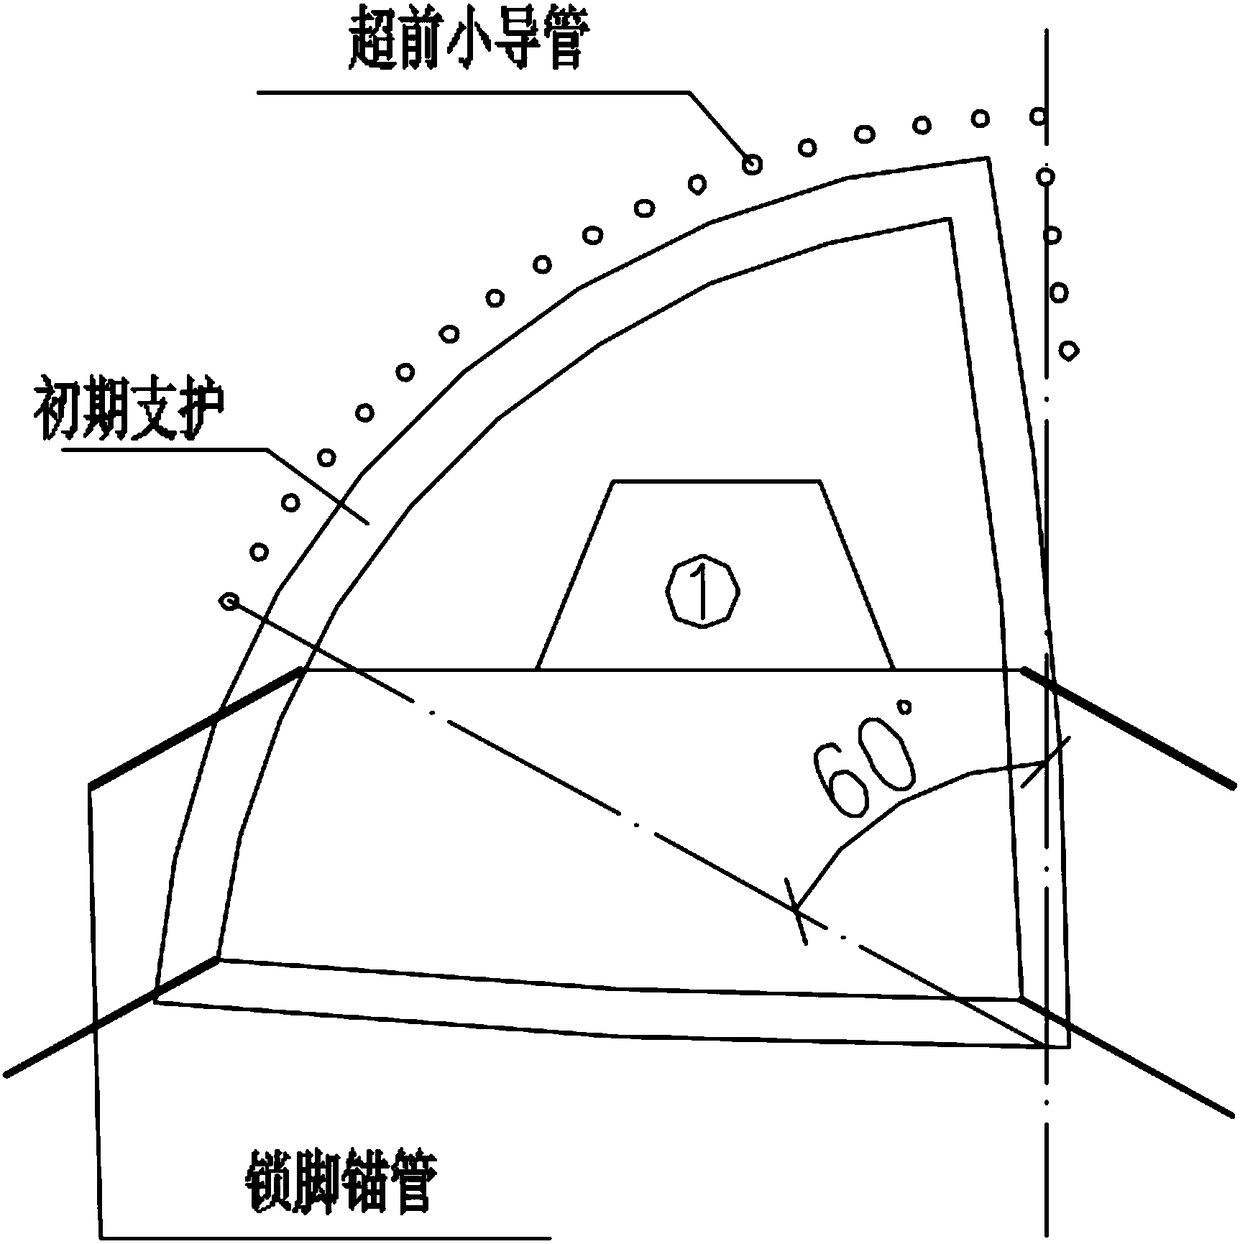 Transition line section tunnel CRD (Cross Diaphragm) construction method